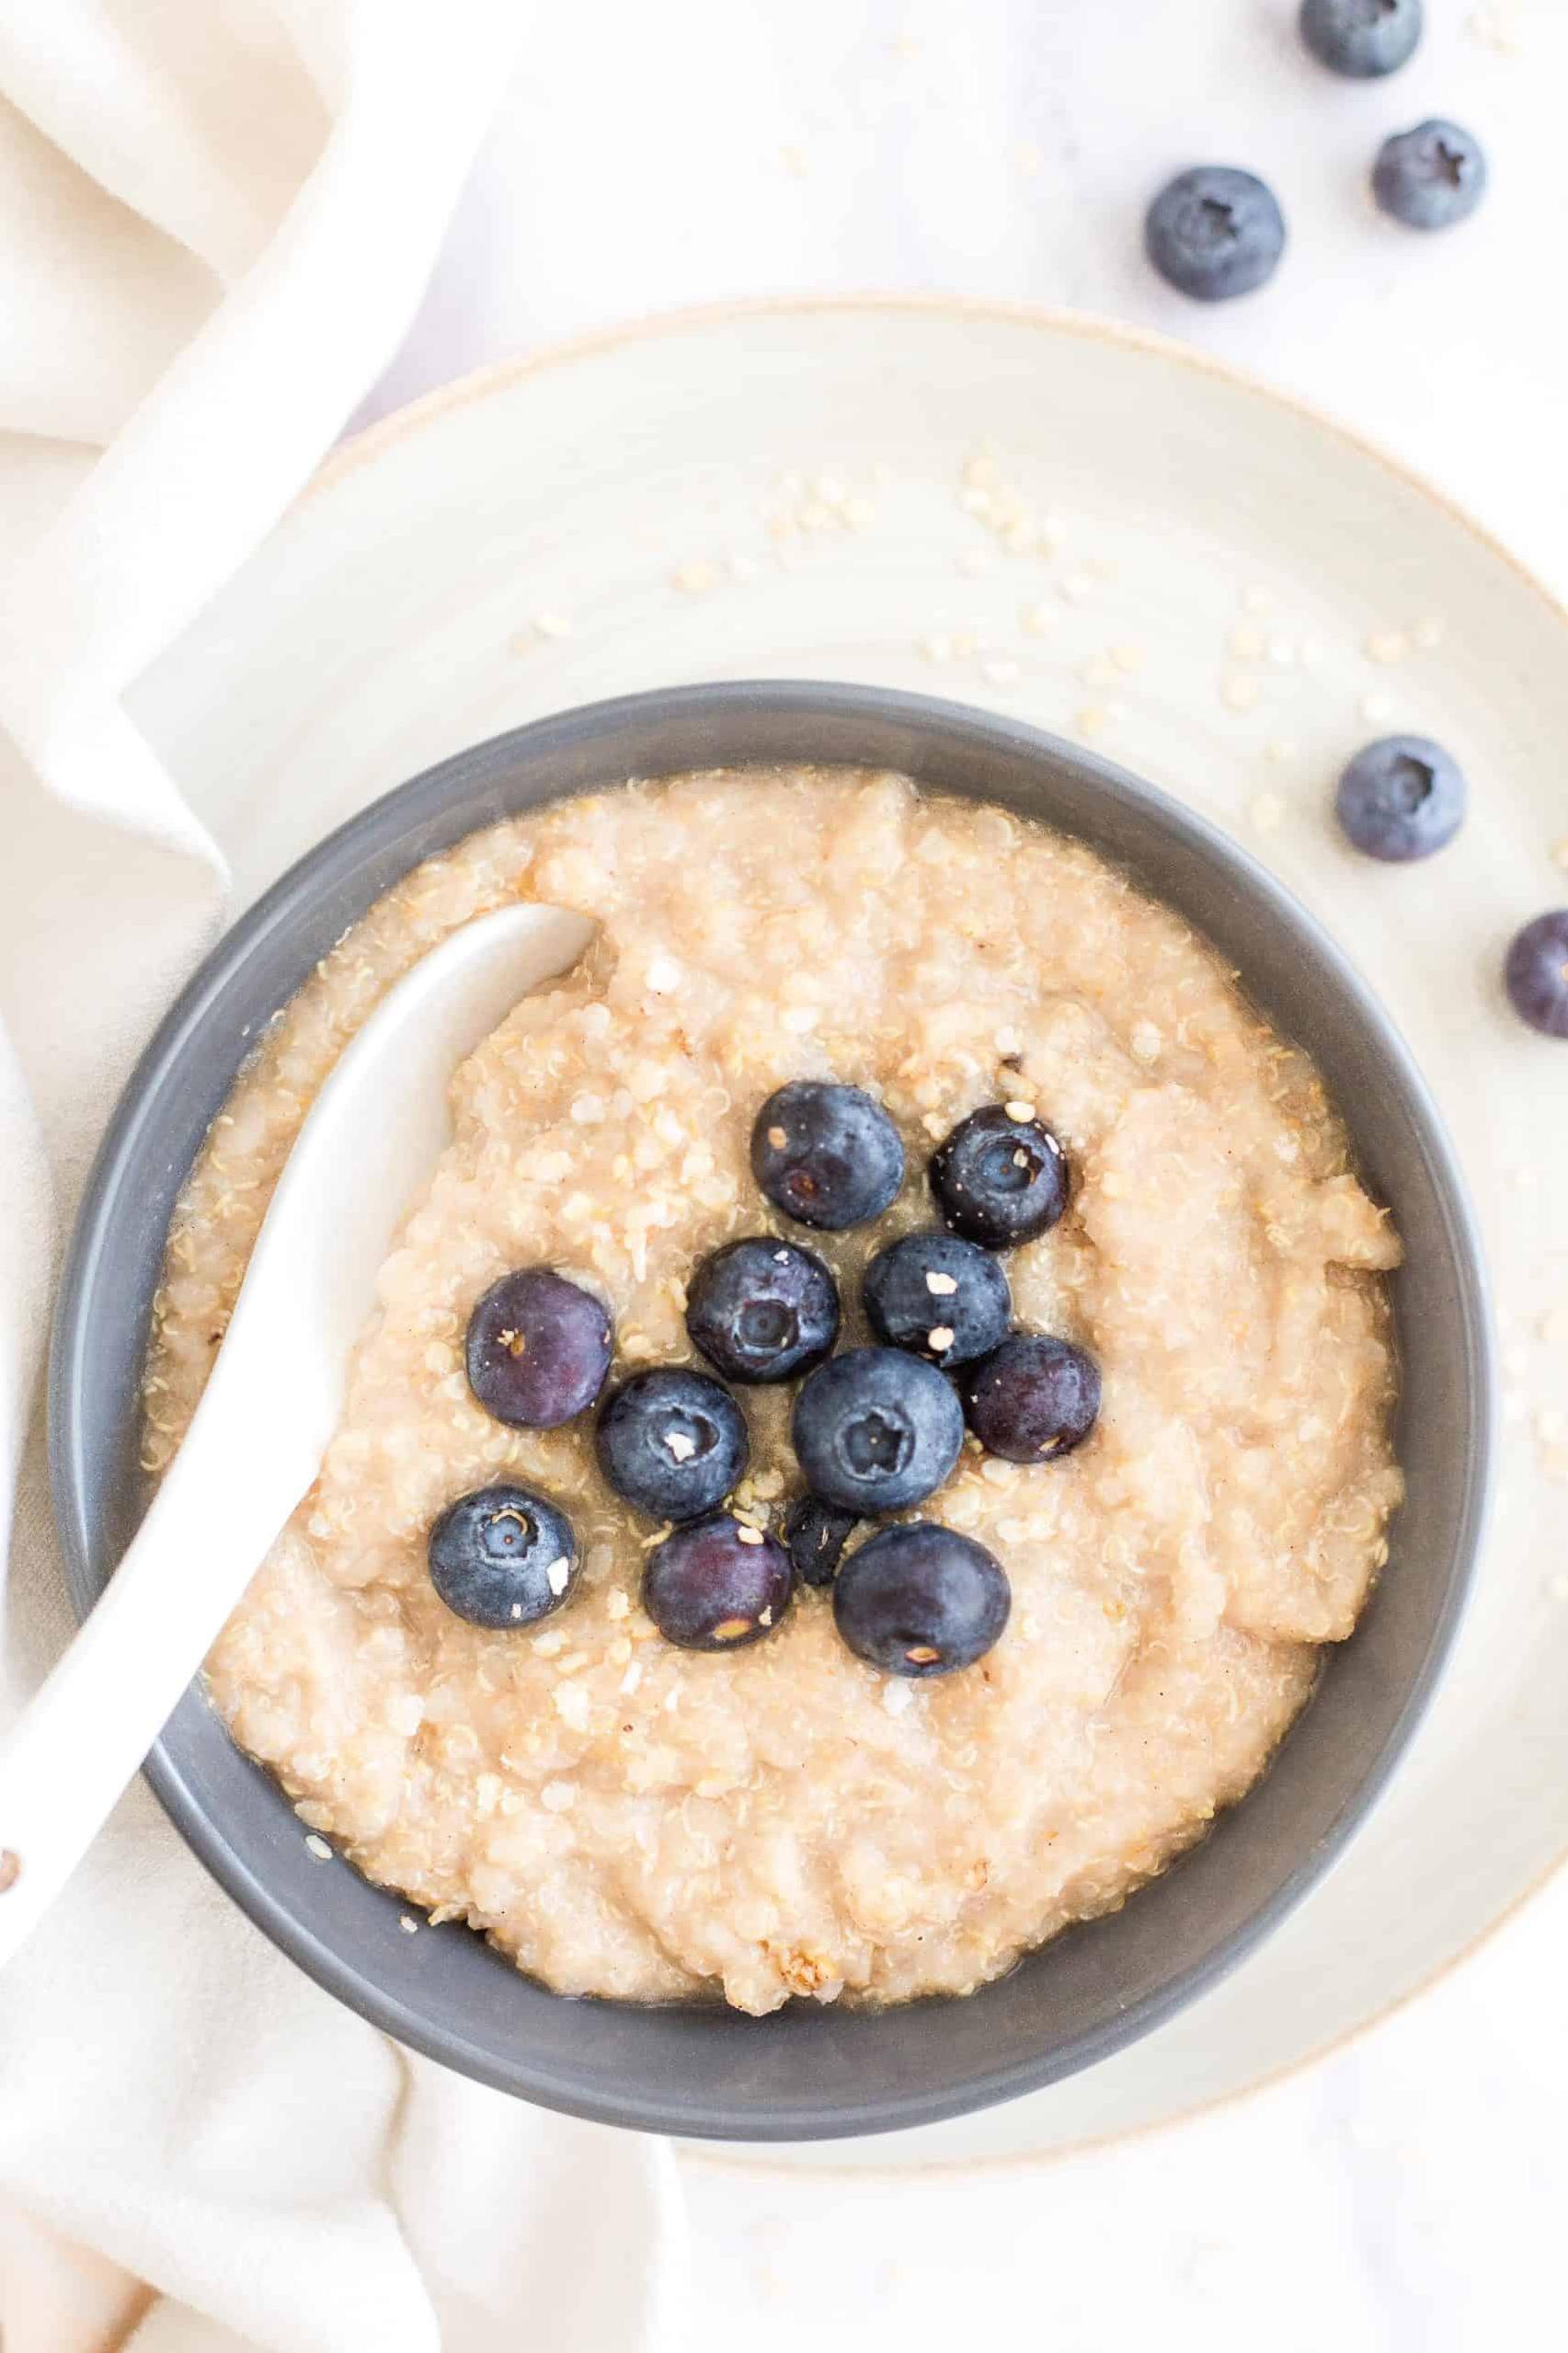  Quinoa and rice combine to create a protein-packed breakfast that will keep you feeling full and energized all morning.